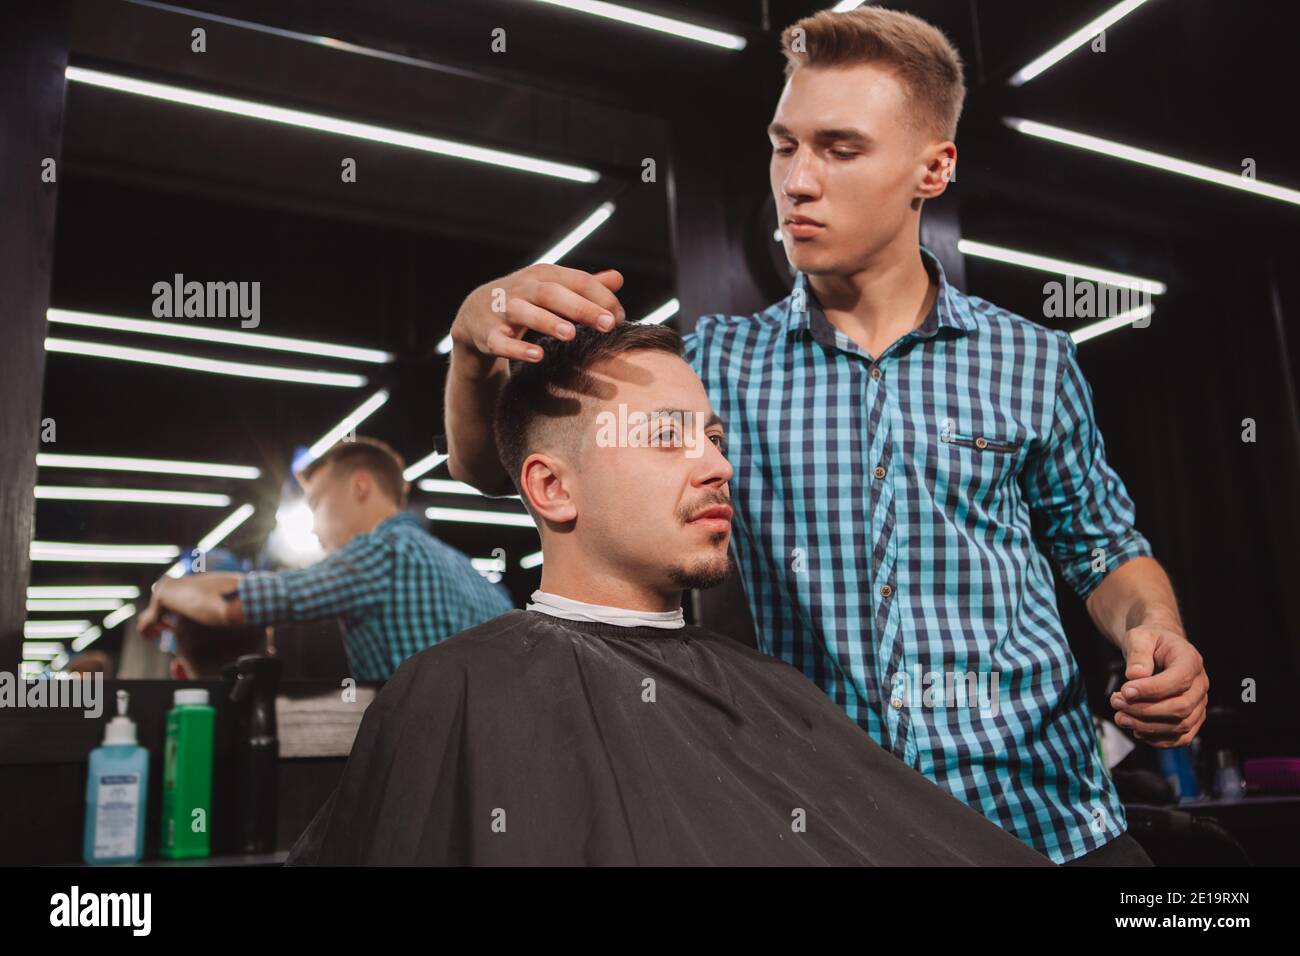 Mature man getting his hair styled by professional barber. Young handsome hairstylist working at his barbershop, styling hair of a male customer Stock Photo